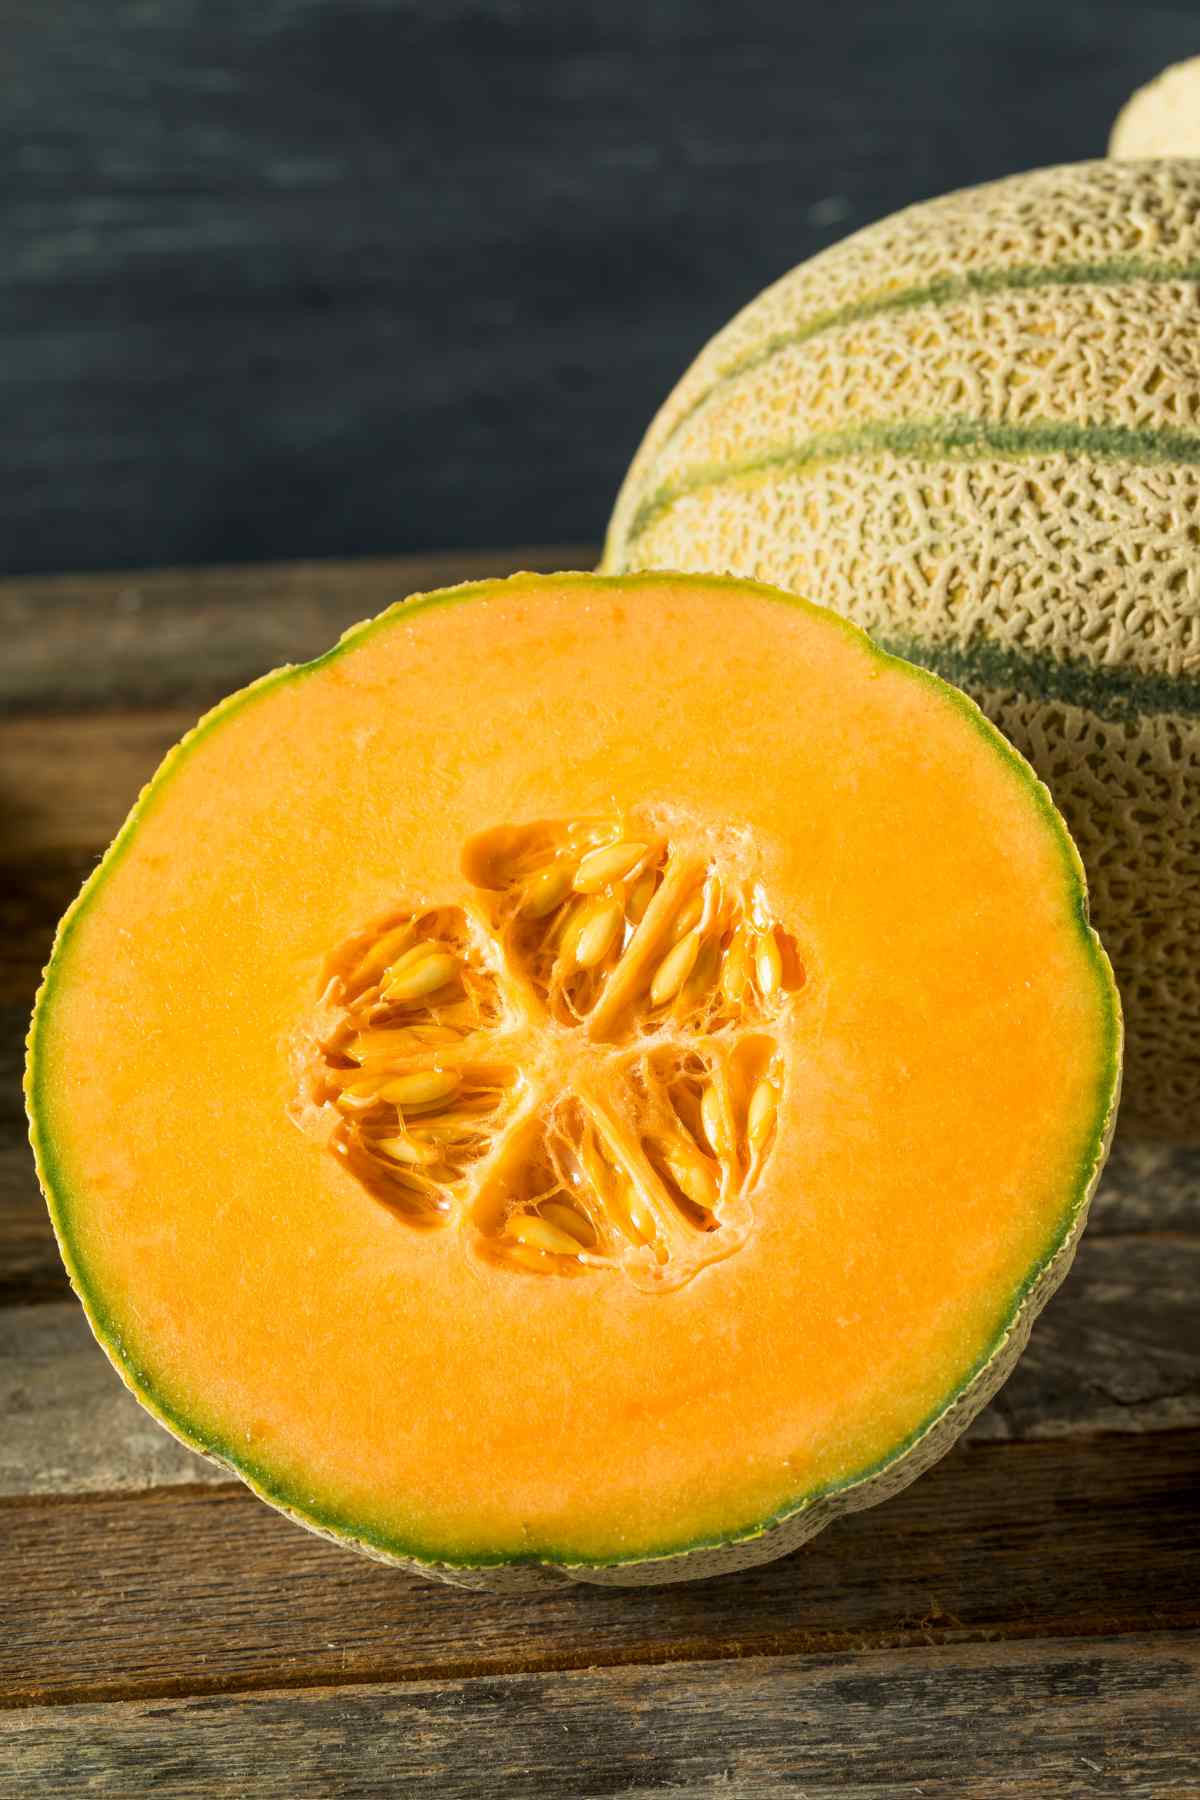 Figuring out what to eat on your keto diet is the first step to ensuring success with your new lifestyle. Is cantaloupe good to eat when you’re following a ketogenic diet? How many carbs does it have? Fruits can be a healthy addition to your keto diet, but the quantity of certain kinds of fruits and the carb count is important to keep in mind.